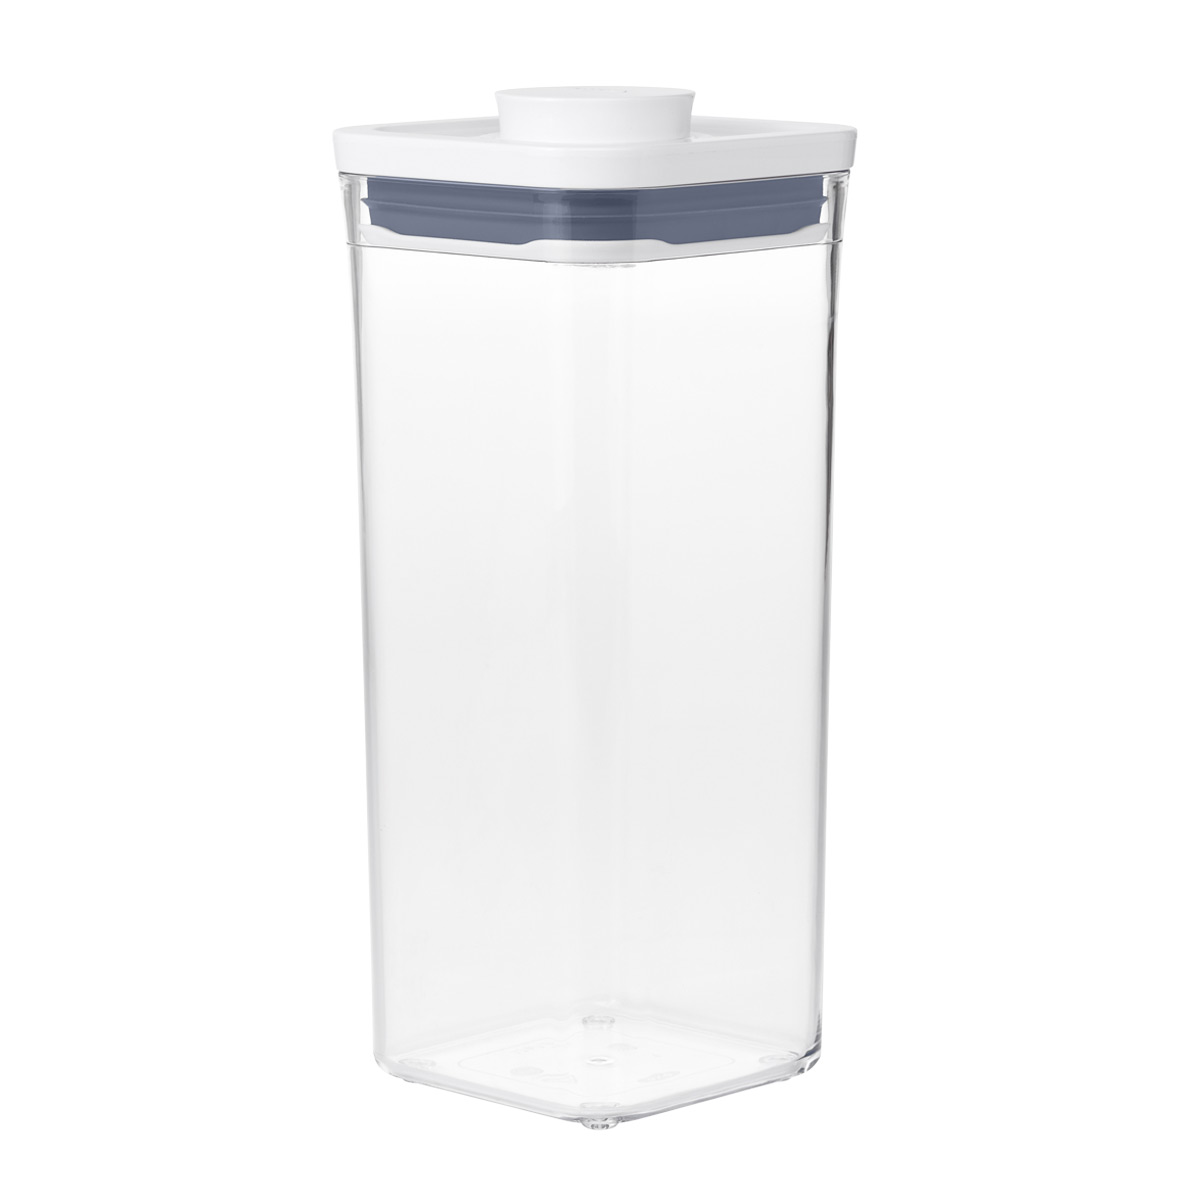 https://images.containerstore.com/catalogimages/369093/10075144-OXO-1.7-qt-POP-Container-Sm.jpg